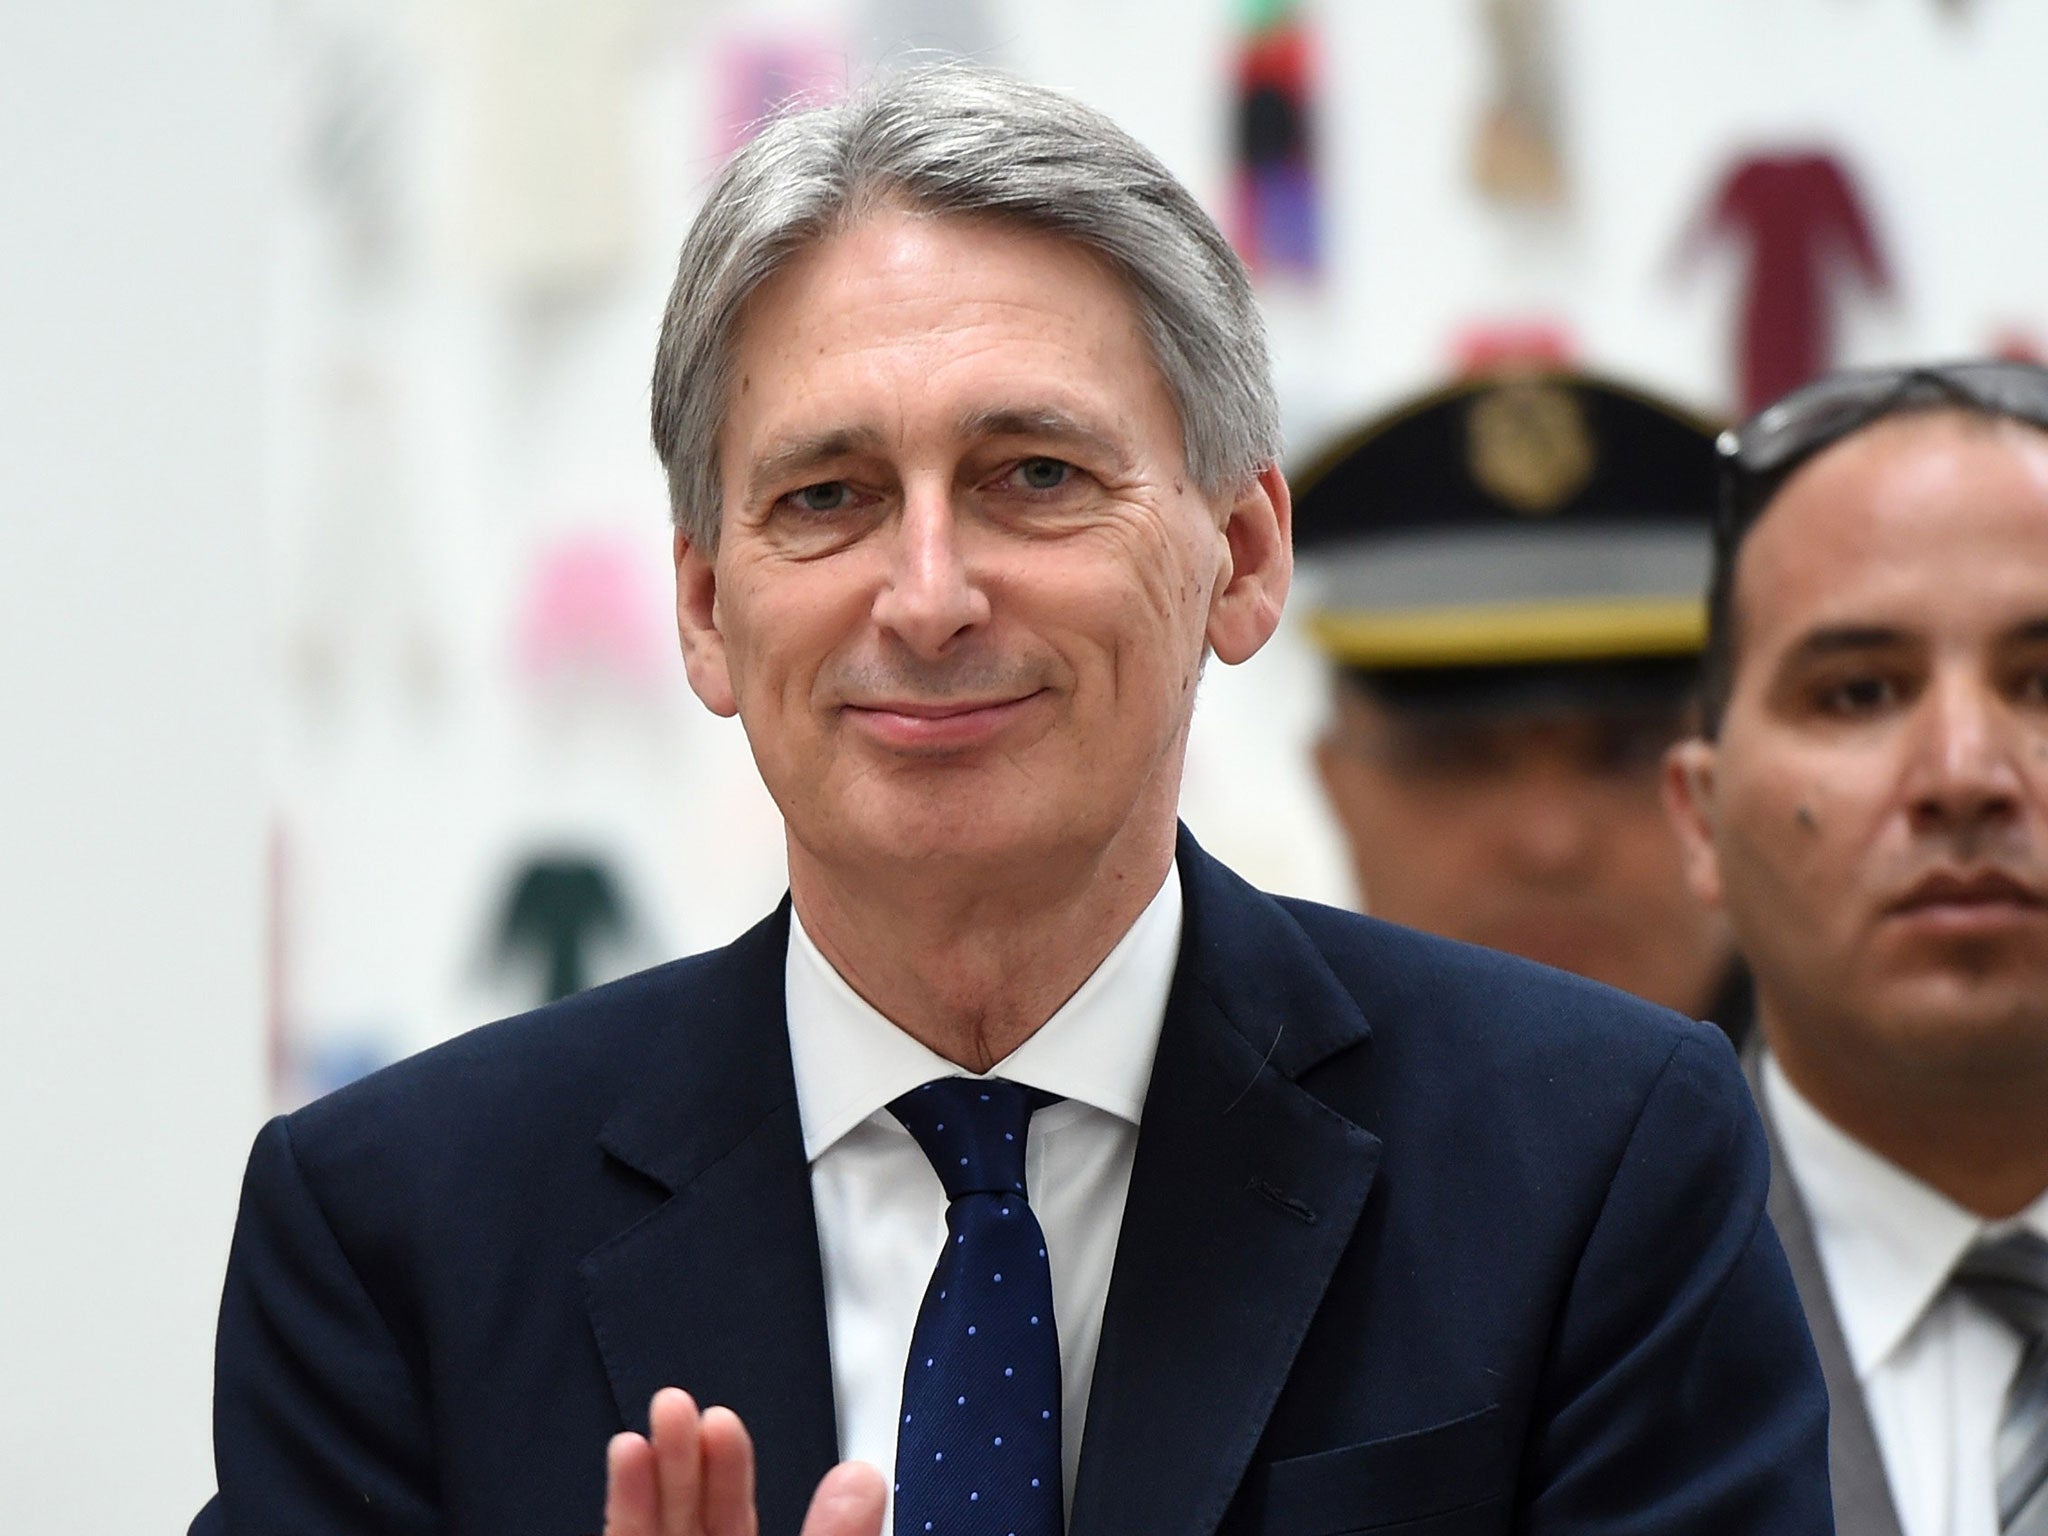 Philip Hammond took the gift despite a ban on ministerial gifts worth over £140